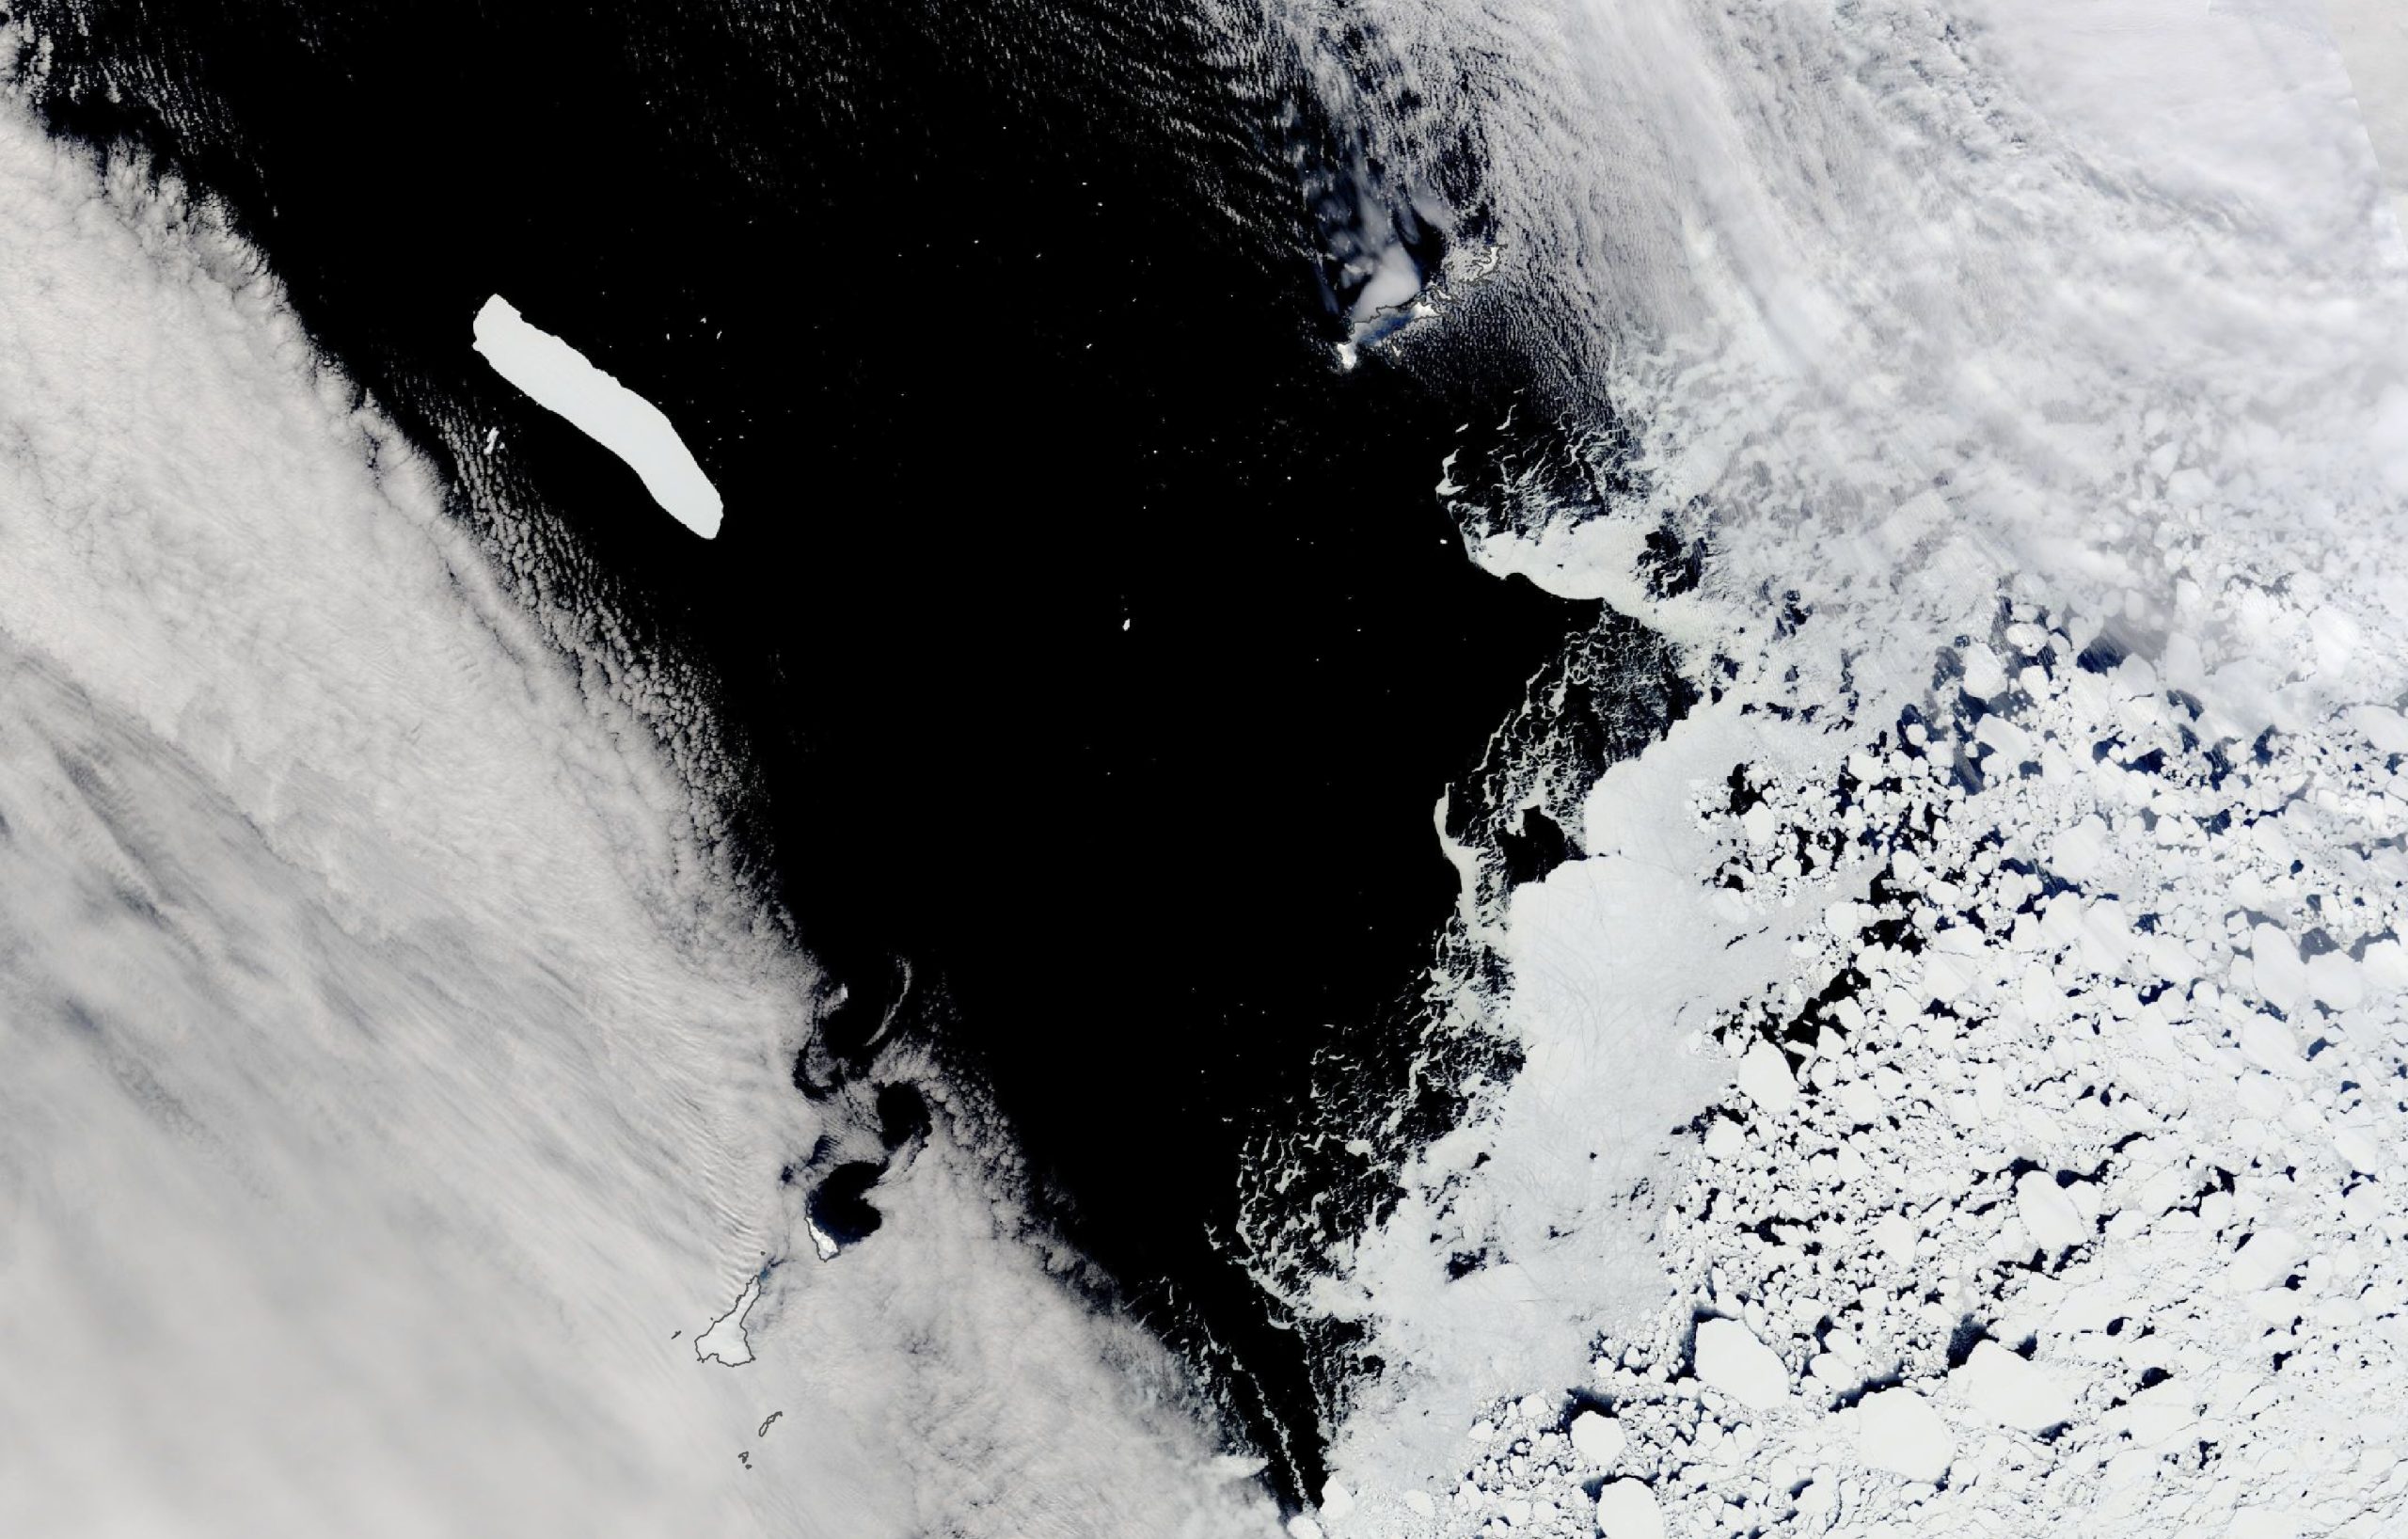 A satellite view of the iceberg. Image Credit: A satellite image showing the iceberg and island with annotations. Image Credit: NASA Earth Observatory images by Lauren Dauphin, using MODIS data from NASA EOSDIS LANCE and GIBS/Worldview.